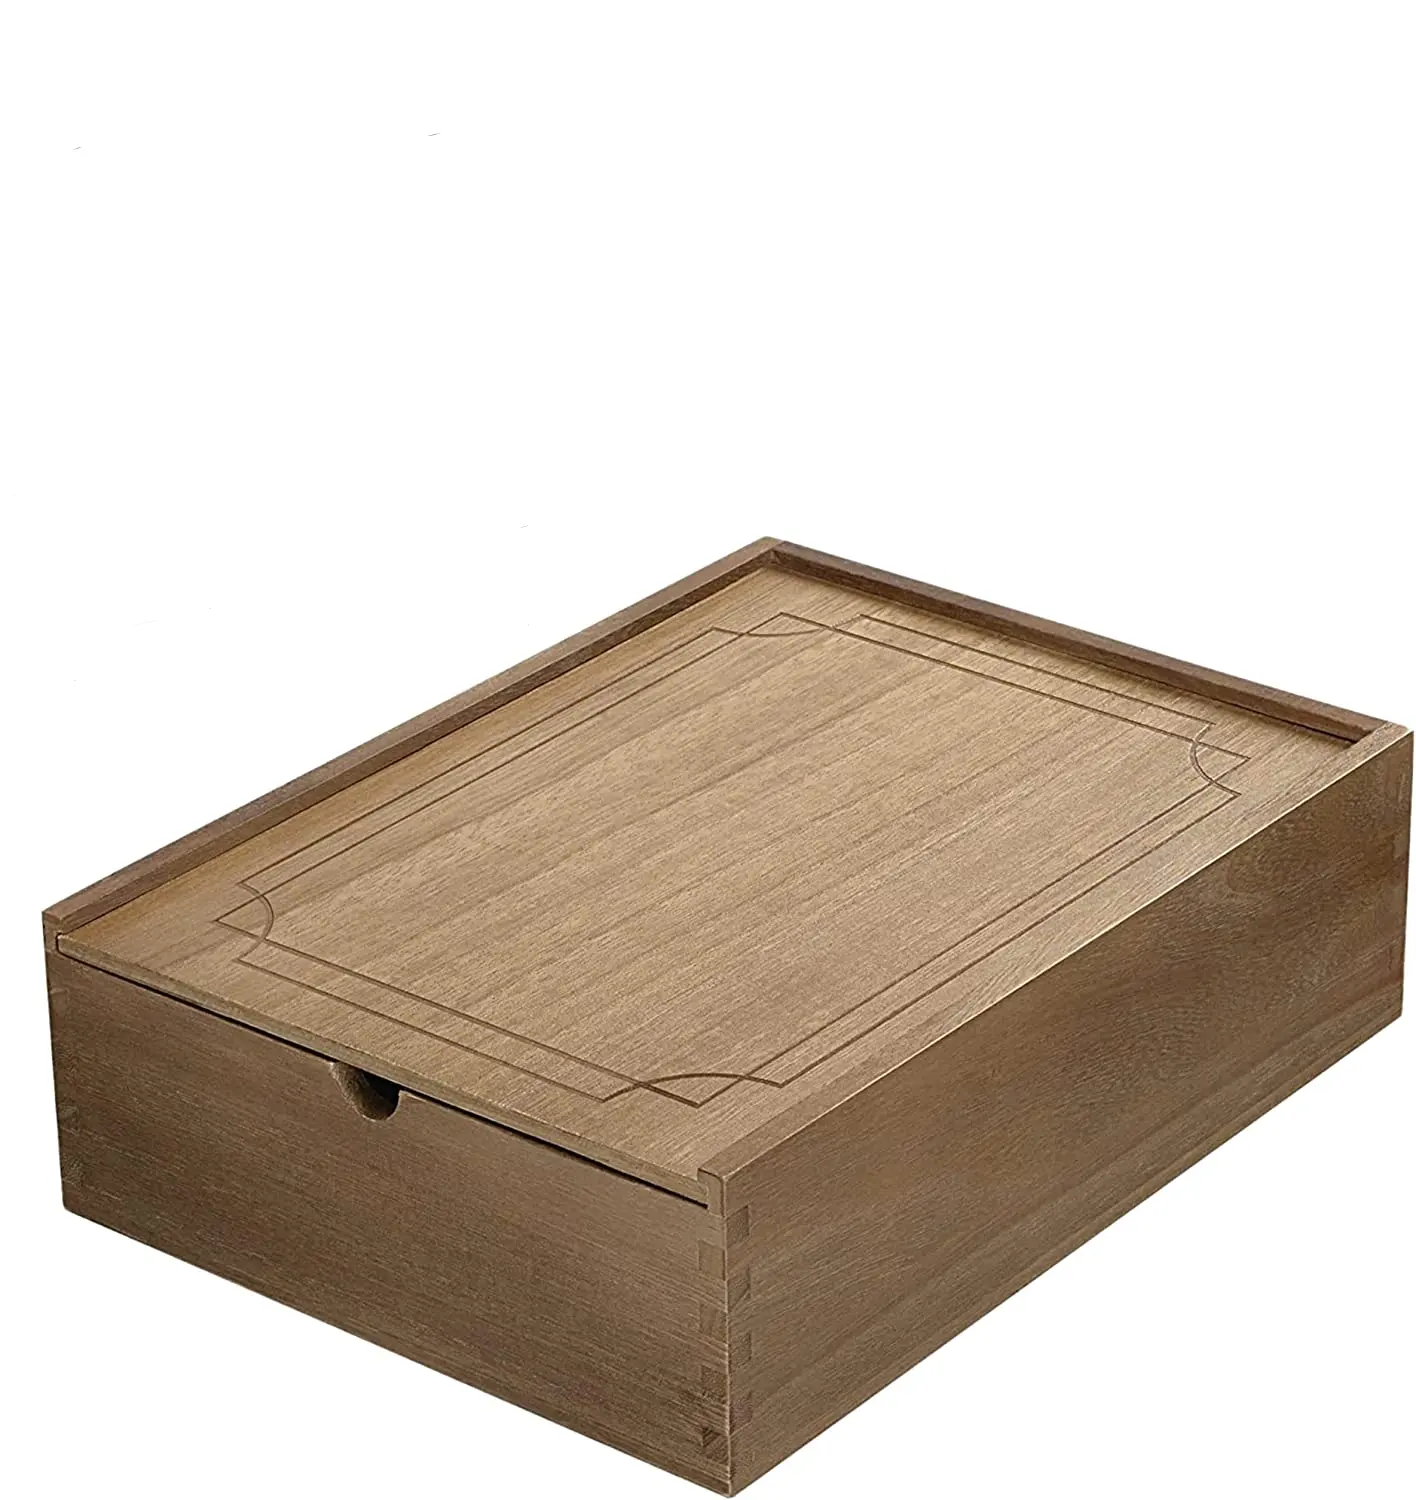 JUNJI Engraved Wood Storage Box for Treasure Wood Keepsake Box with Sliding Lid for Jewelry Trinkets Letters Souvenirs